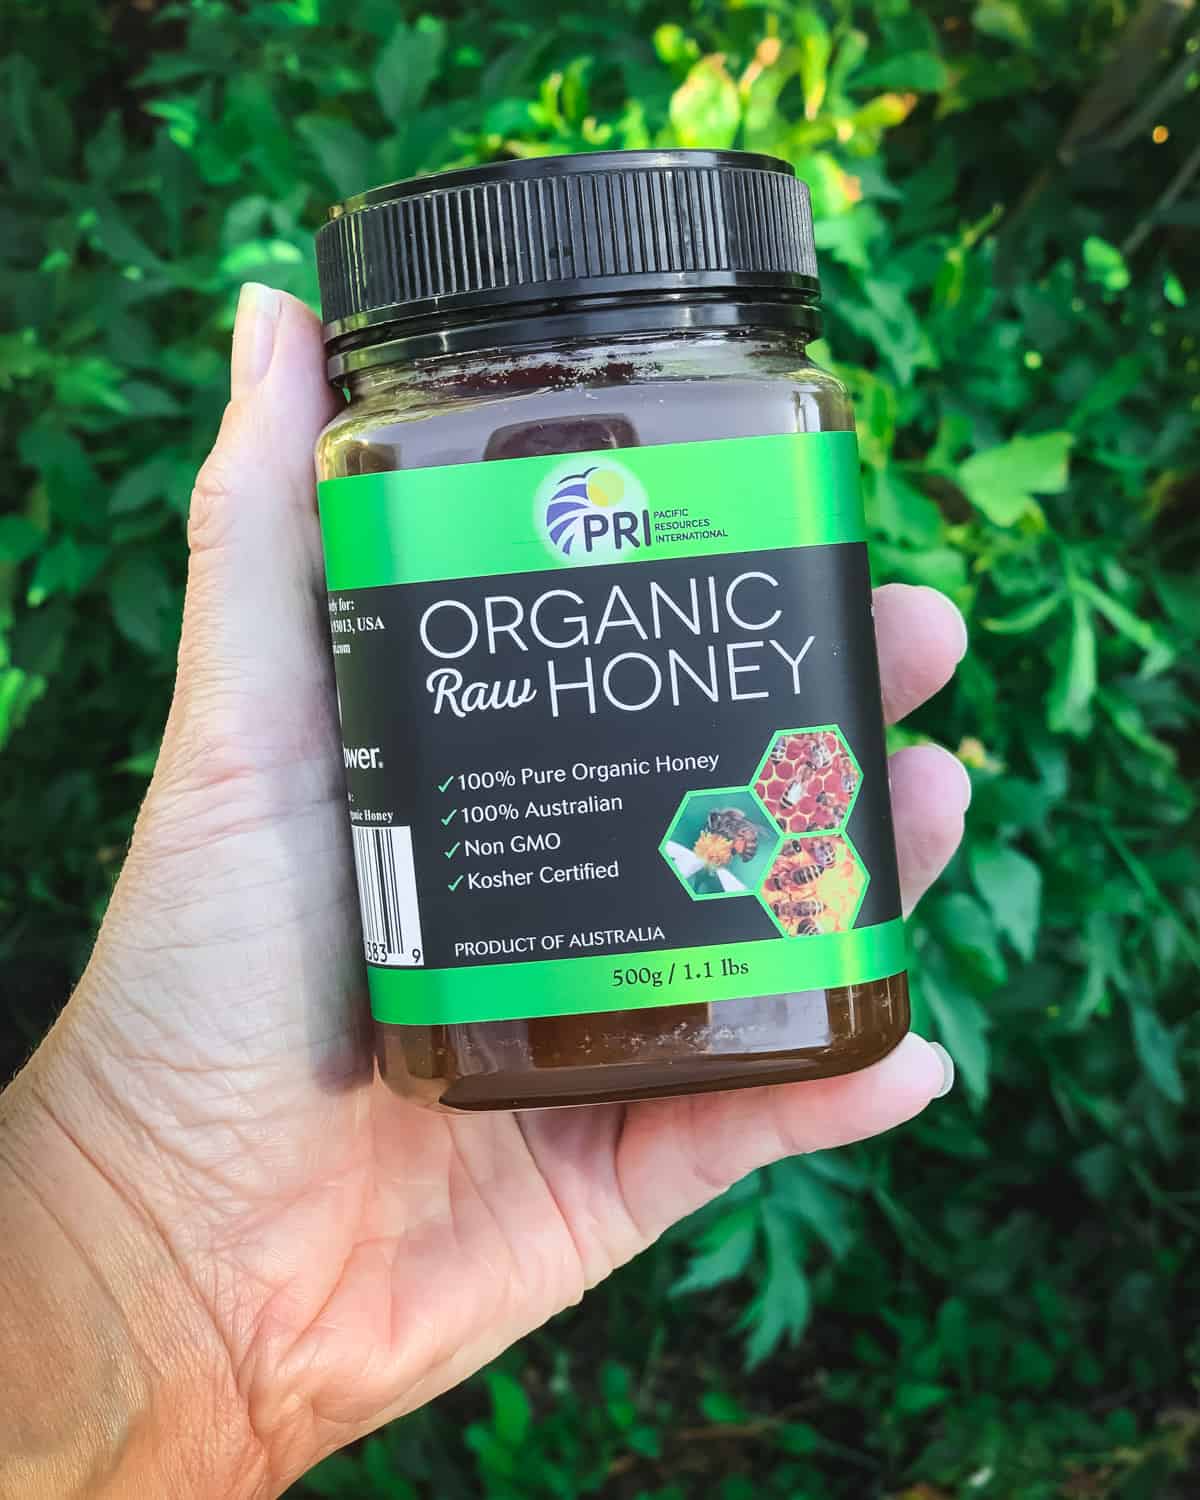 a hand holding a container of organic raw honey from pri